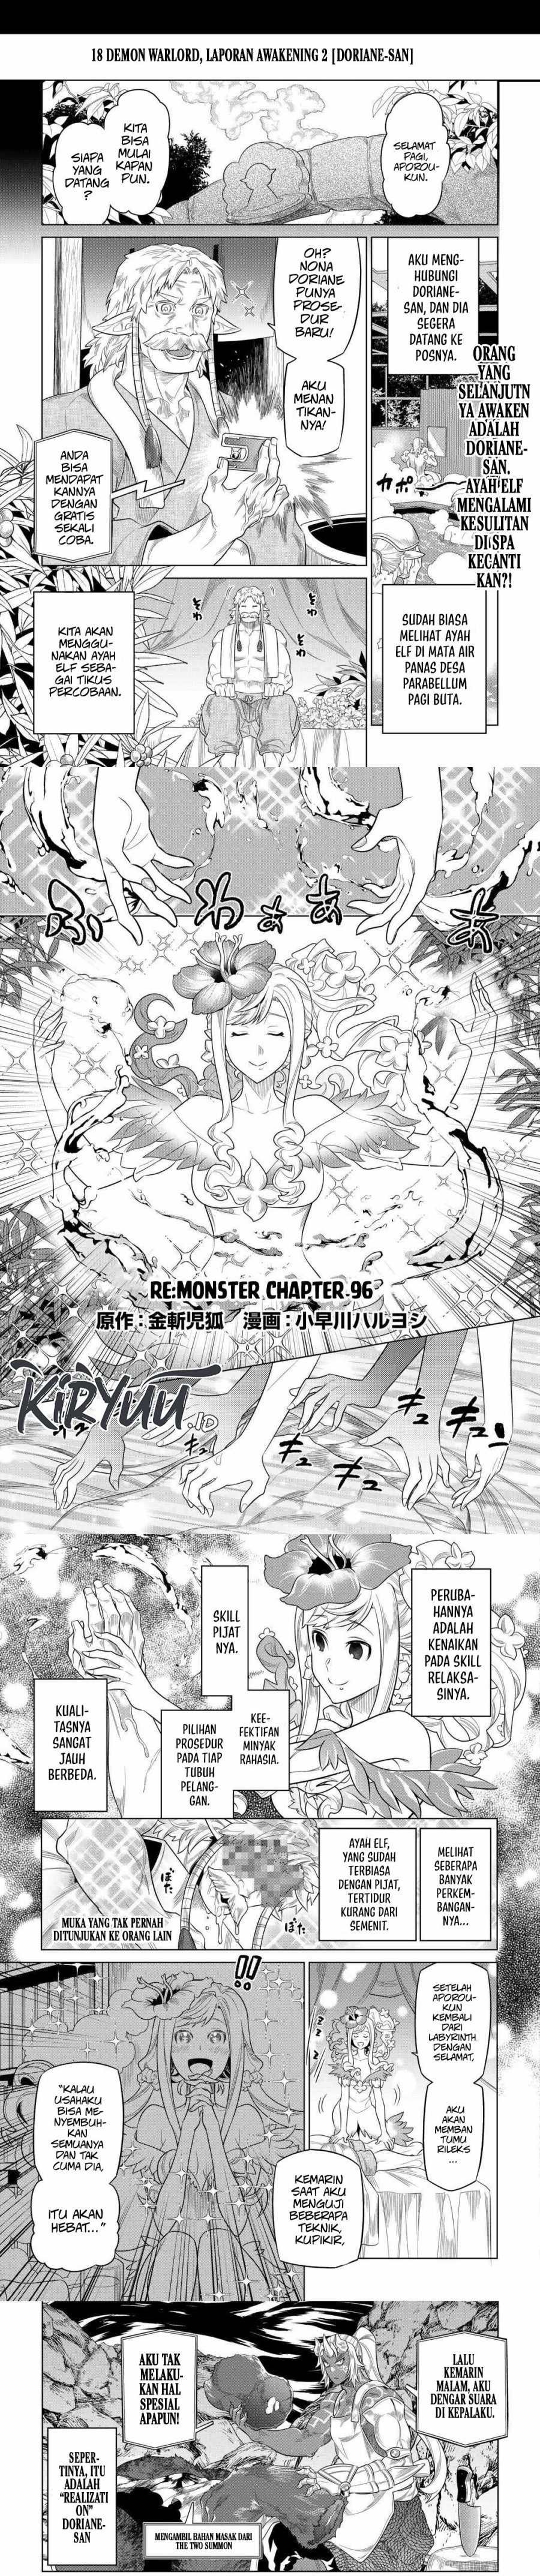 Re:Monster Chapter 96